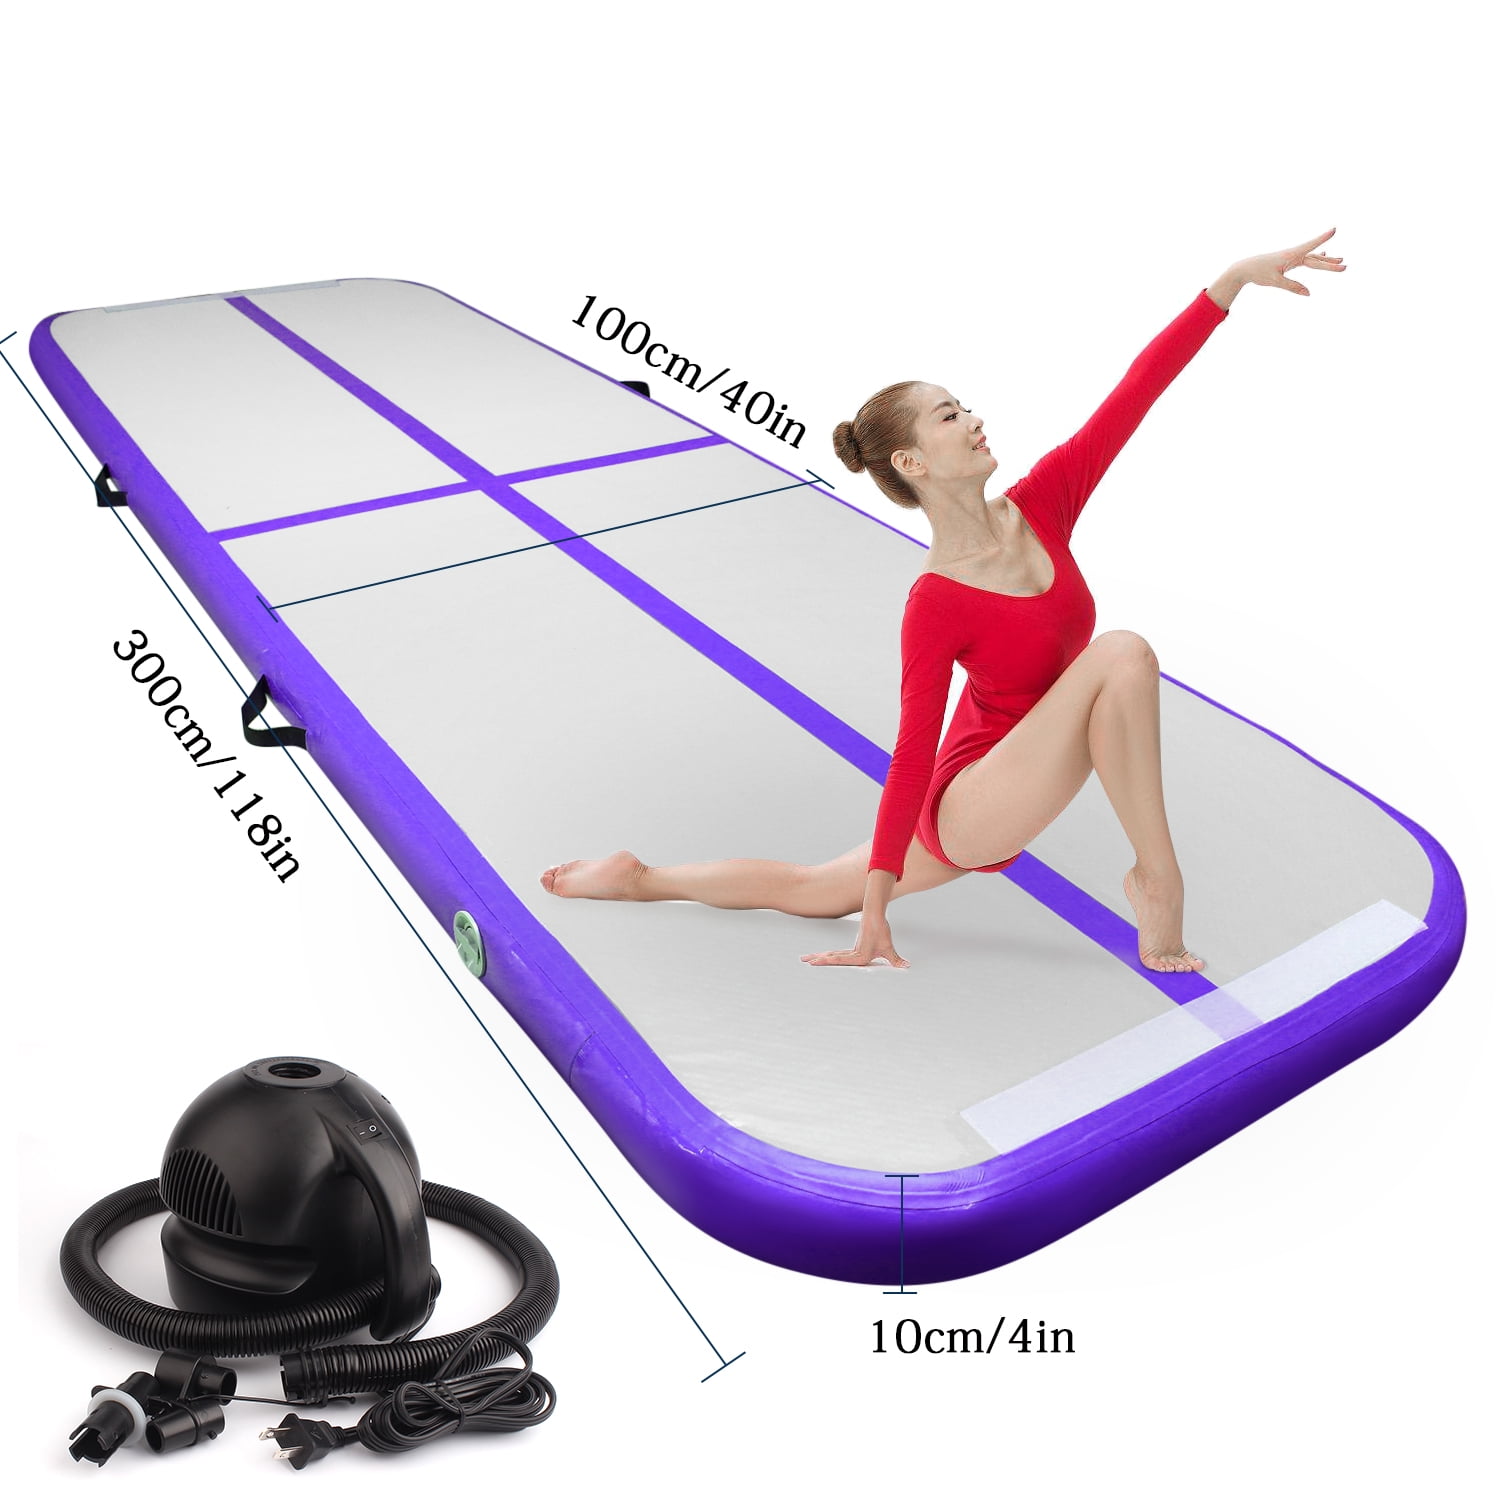 GLANT 10ft/13ft/16ft/20ft Air Track Mat Air Track Tumbling Mat Gymnastics Mat Floor Mats with Electric Pump for Home Use/Training/Cheerleading/Beach/Park and Water 